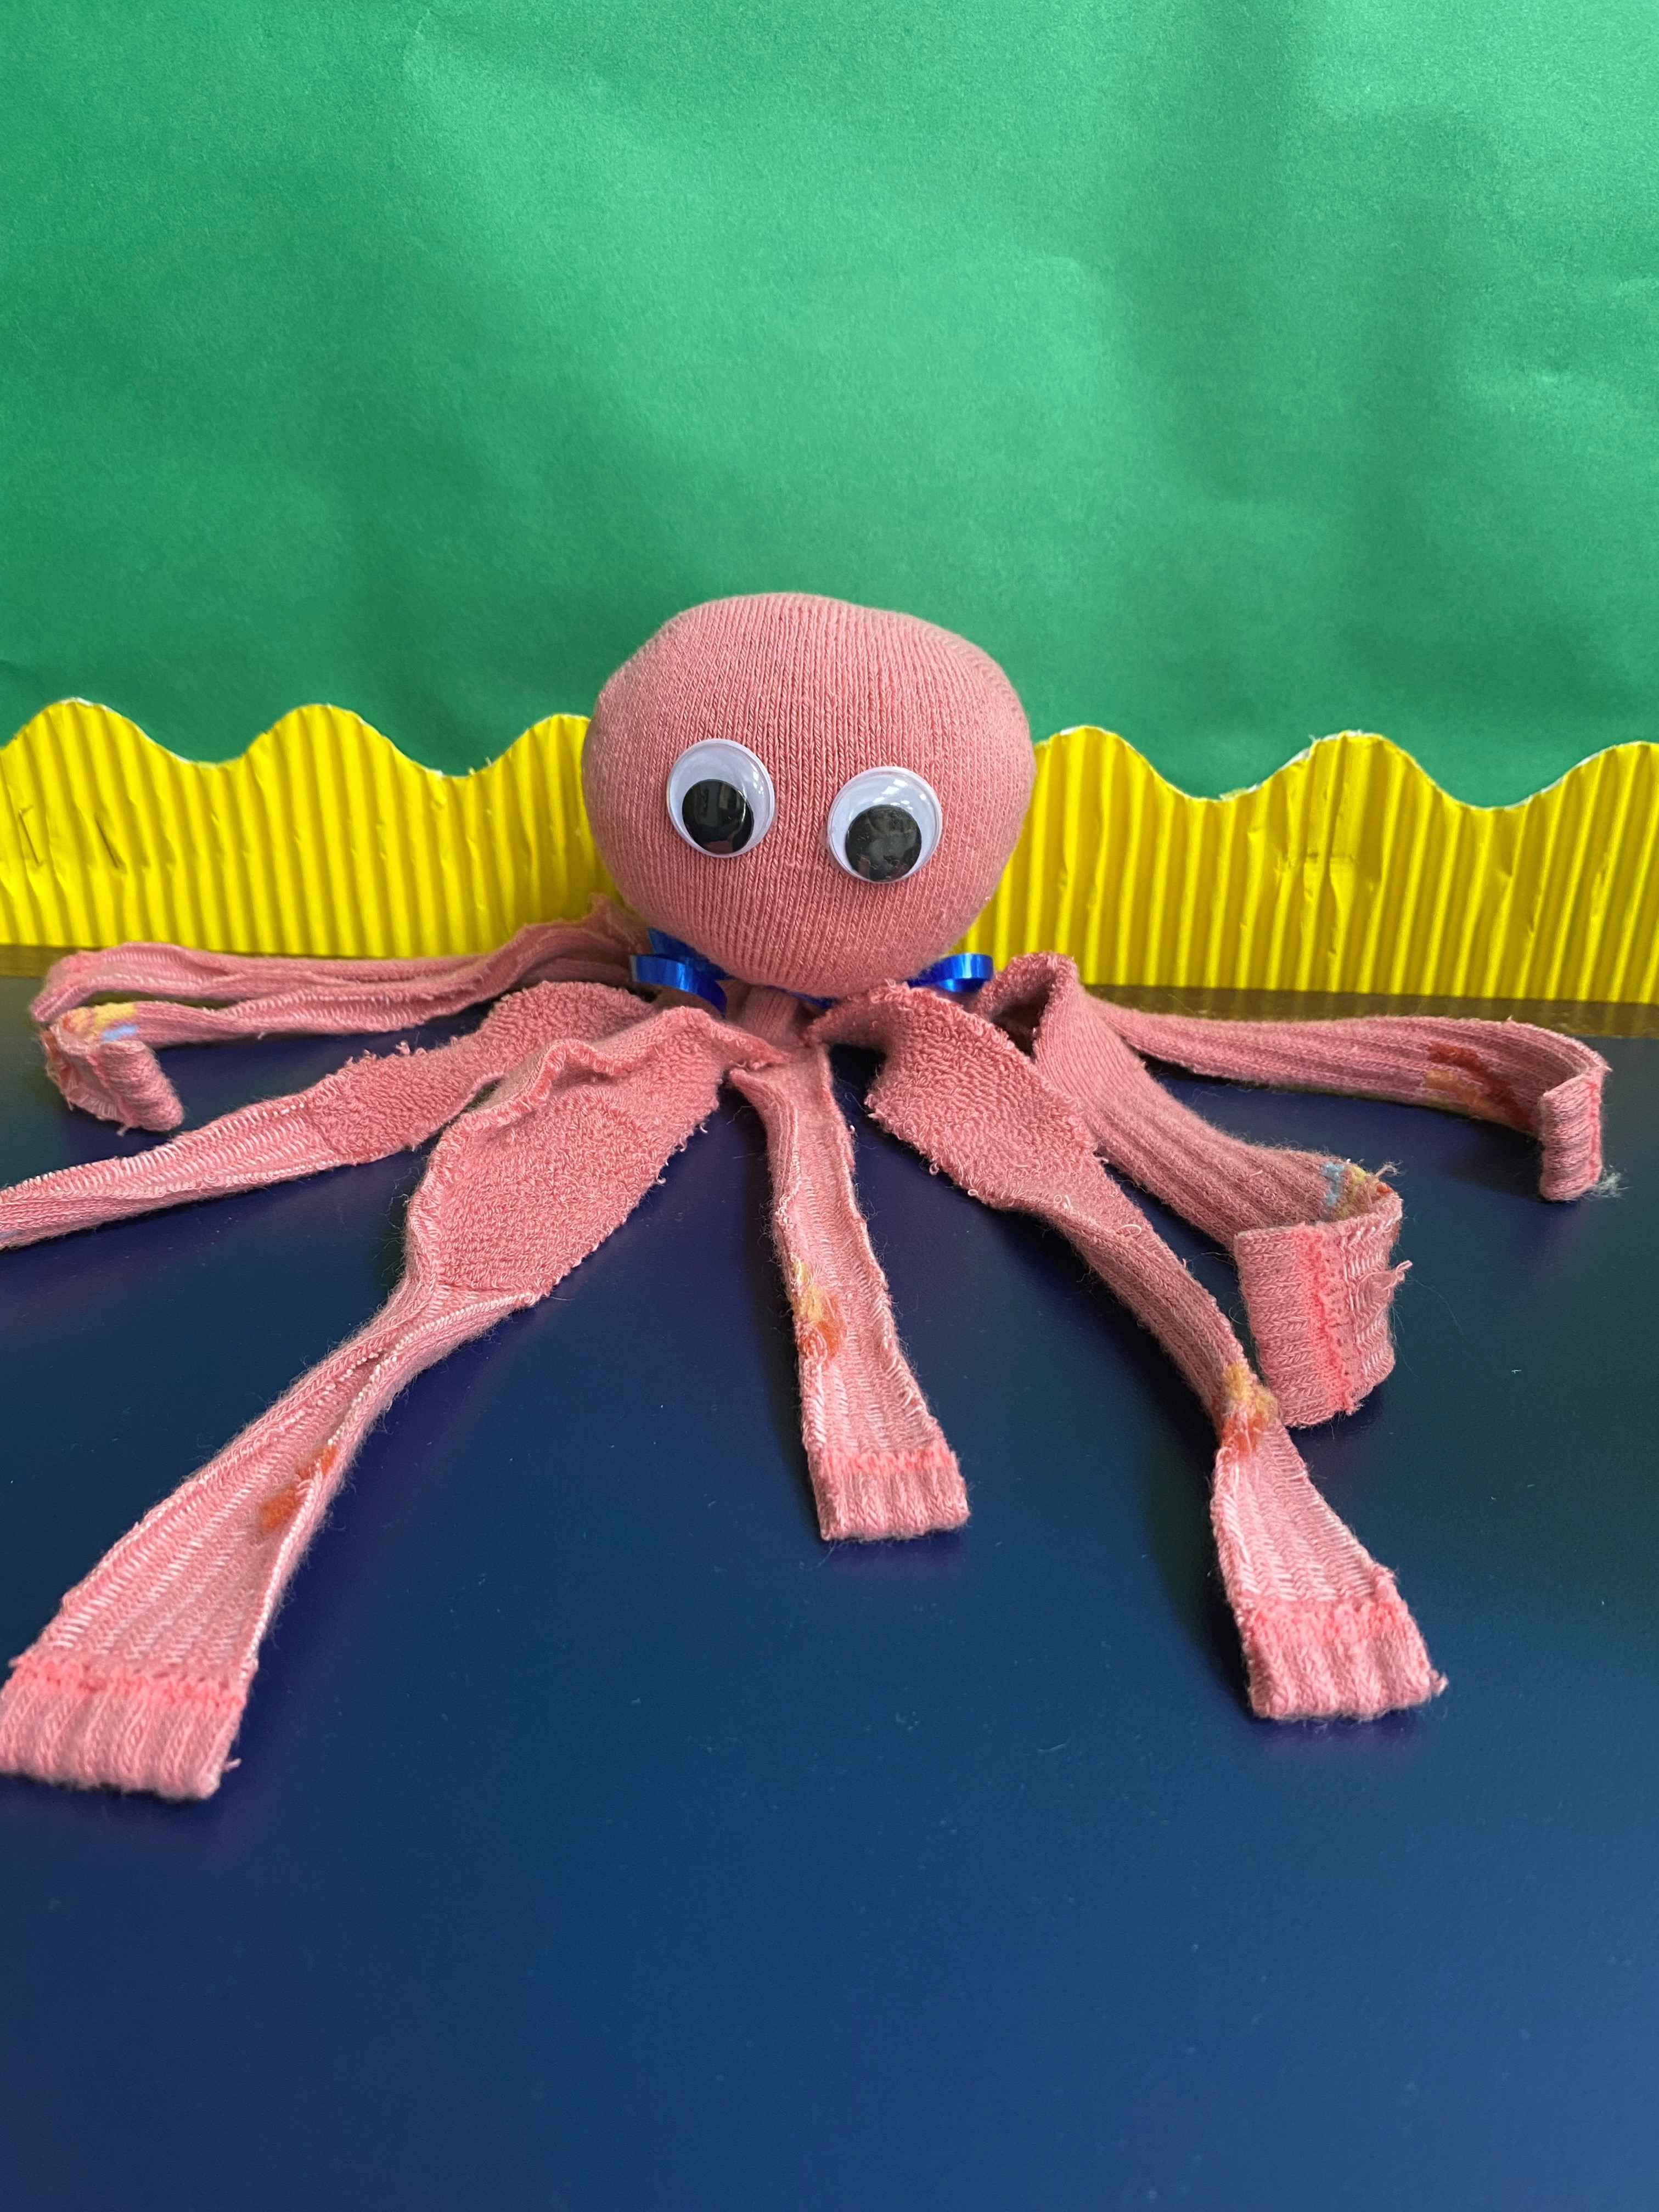 The Sock Octopus or the "Socktopus"